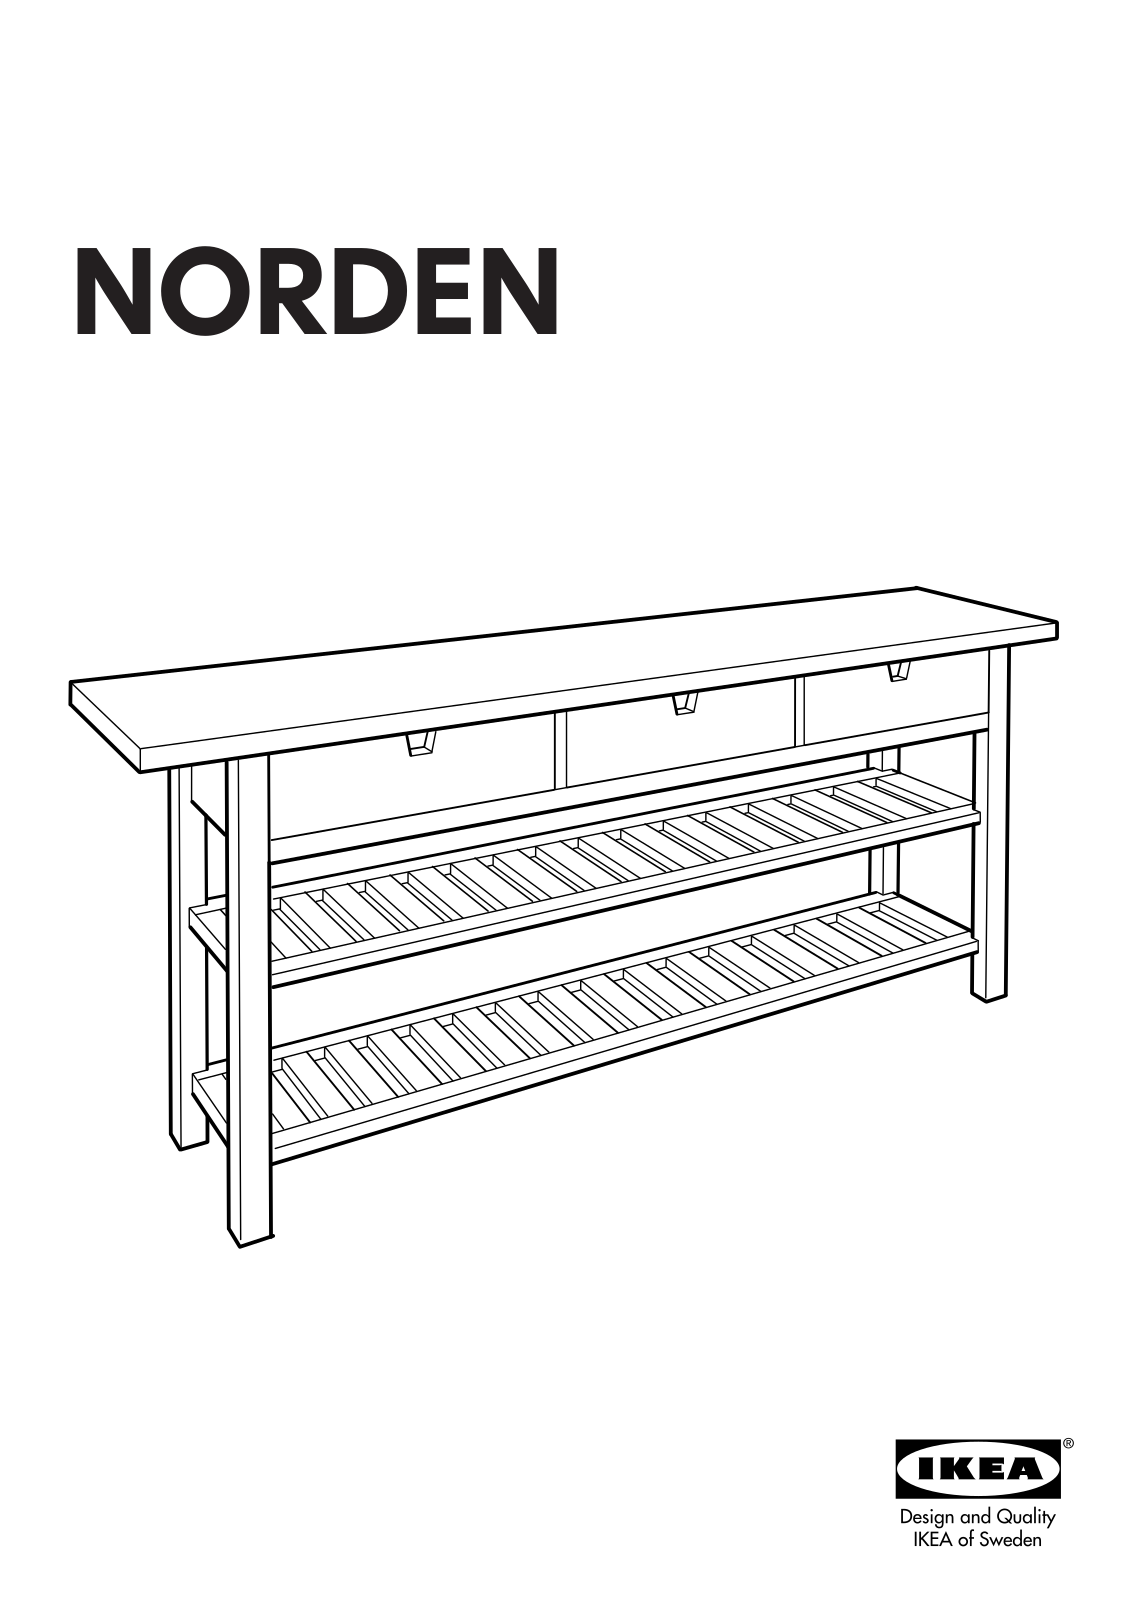 IKEA NORDEN OCCASIONAL TABLE 74X35 3-8 Assembly Instruction